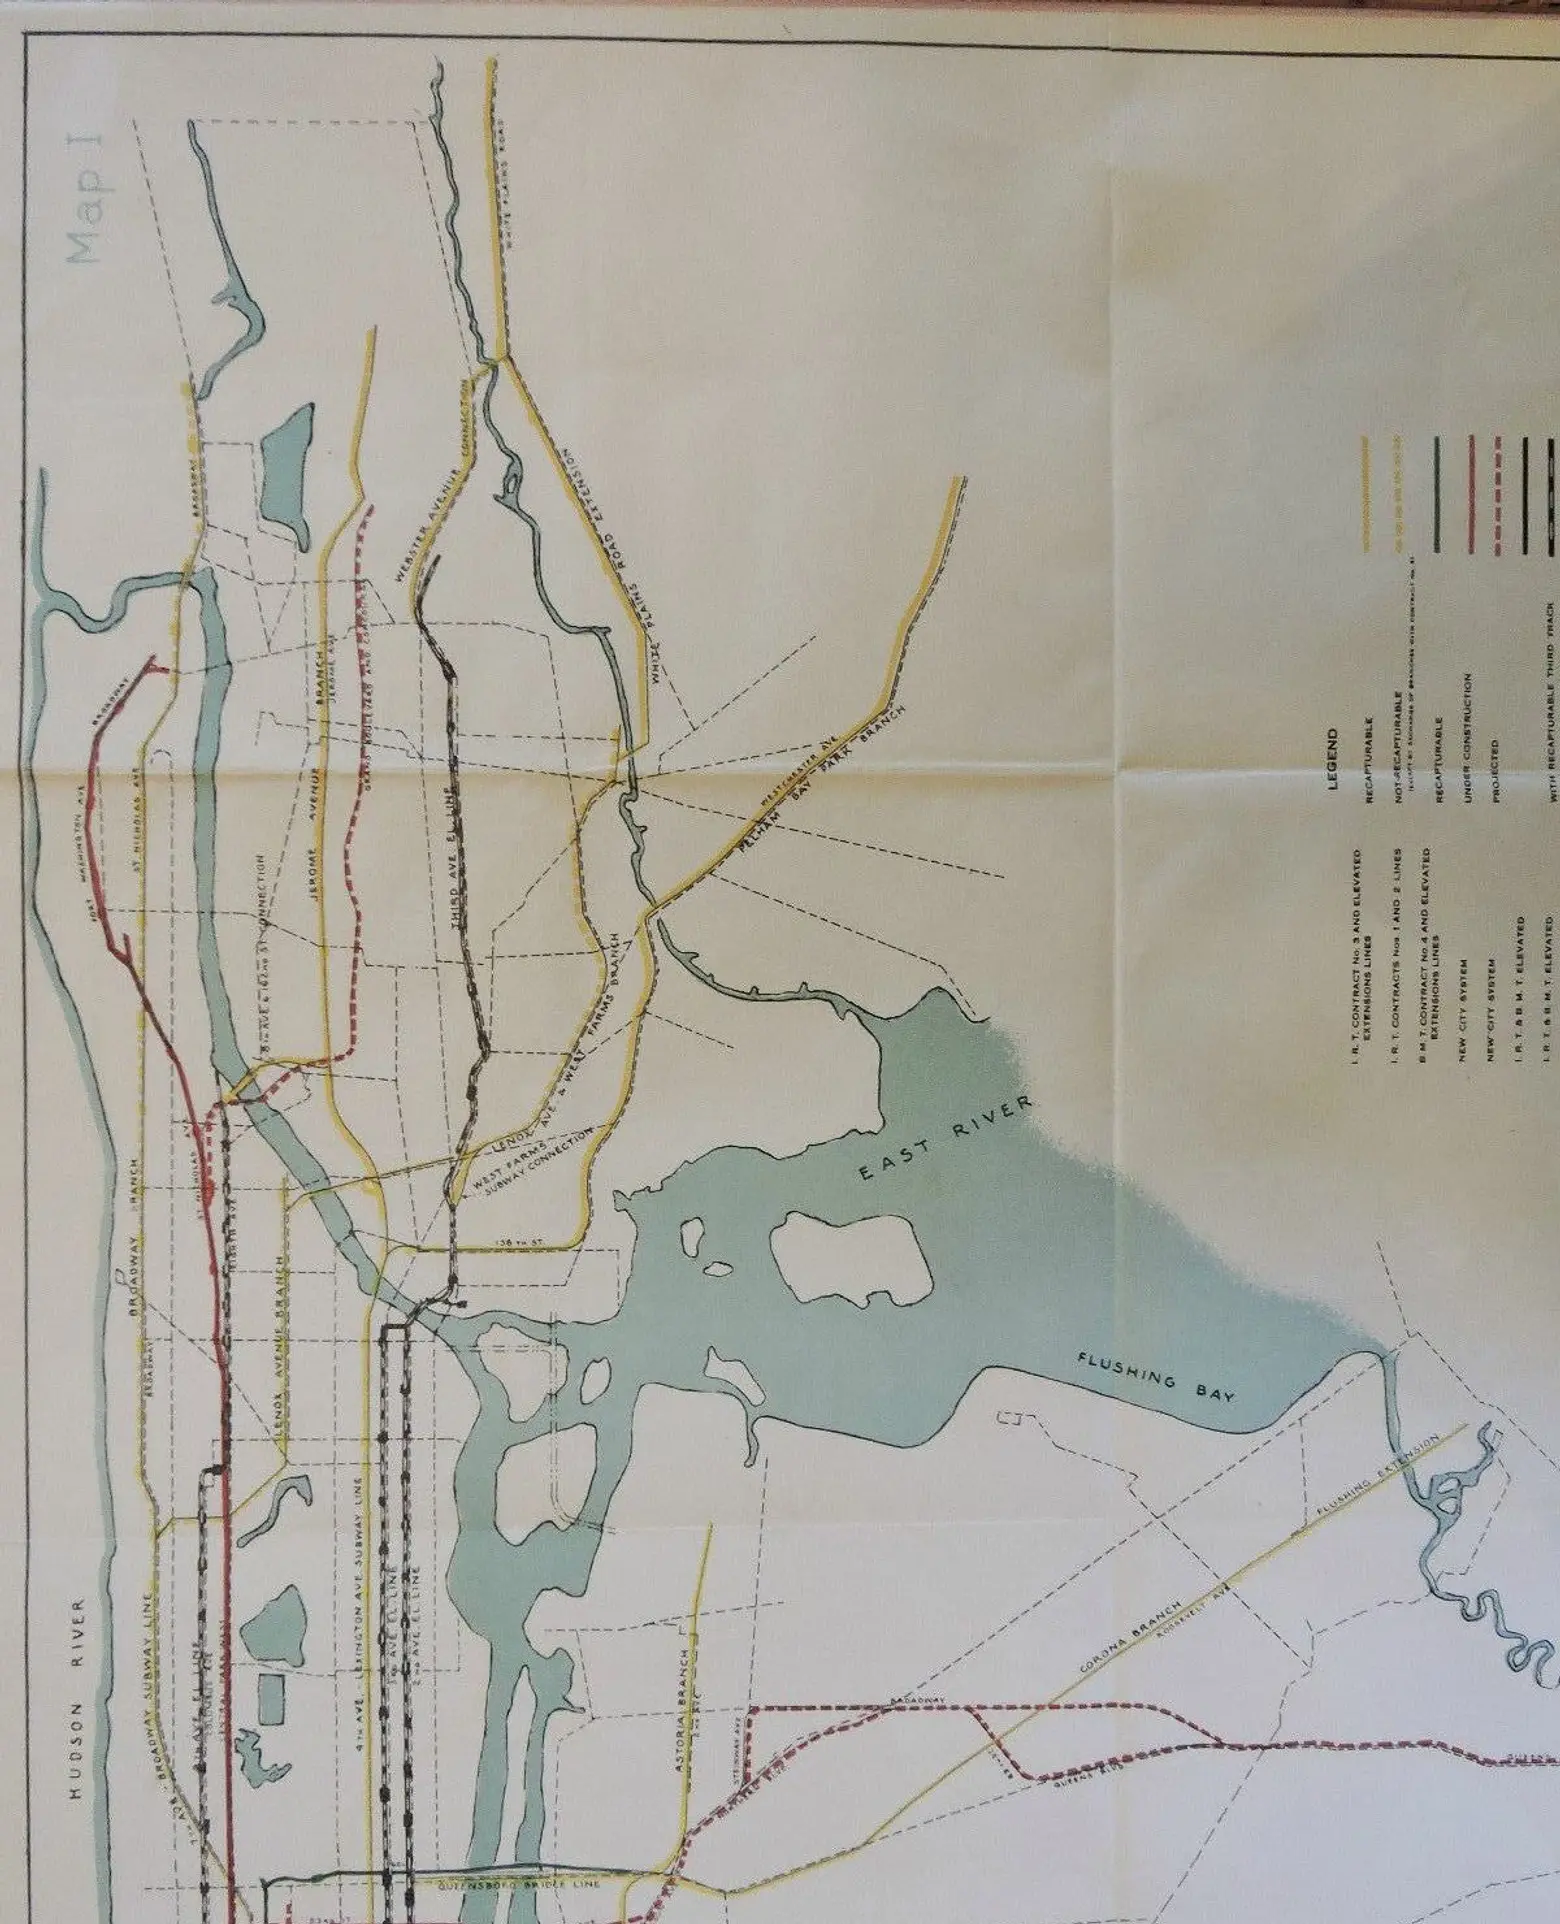 1927 subway map, Independent Subway System, ISS, IND, transit maps, nyc subway, historic subway maps, city planning, maps